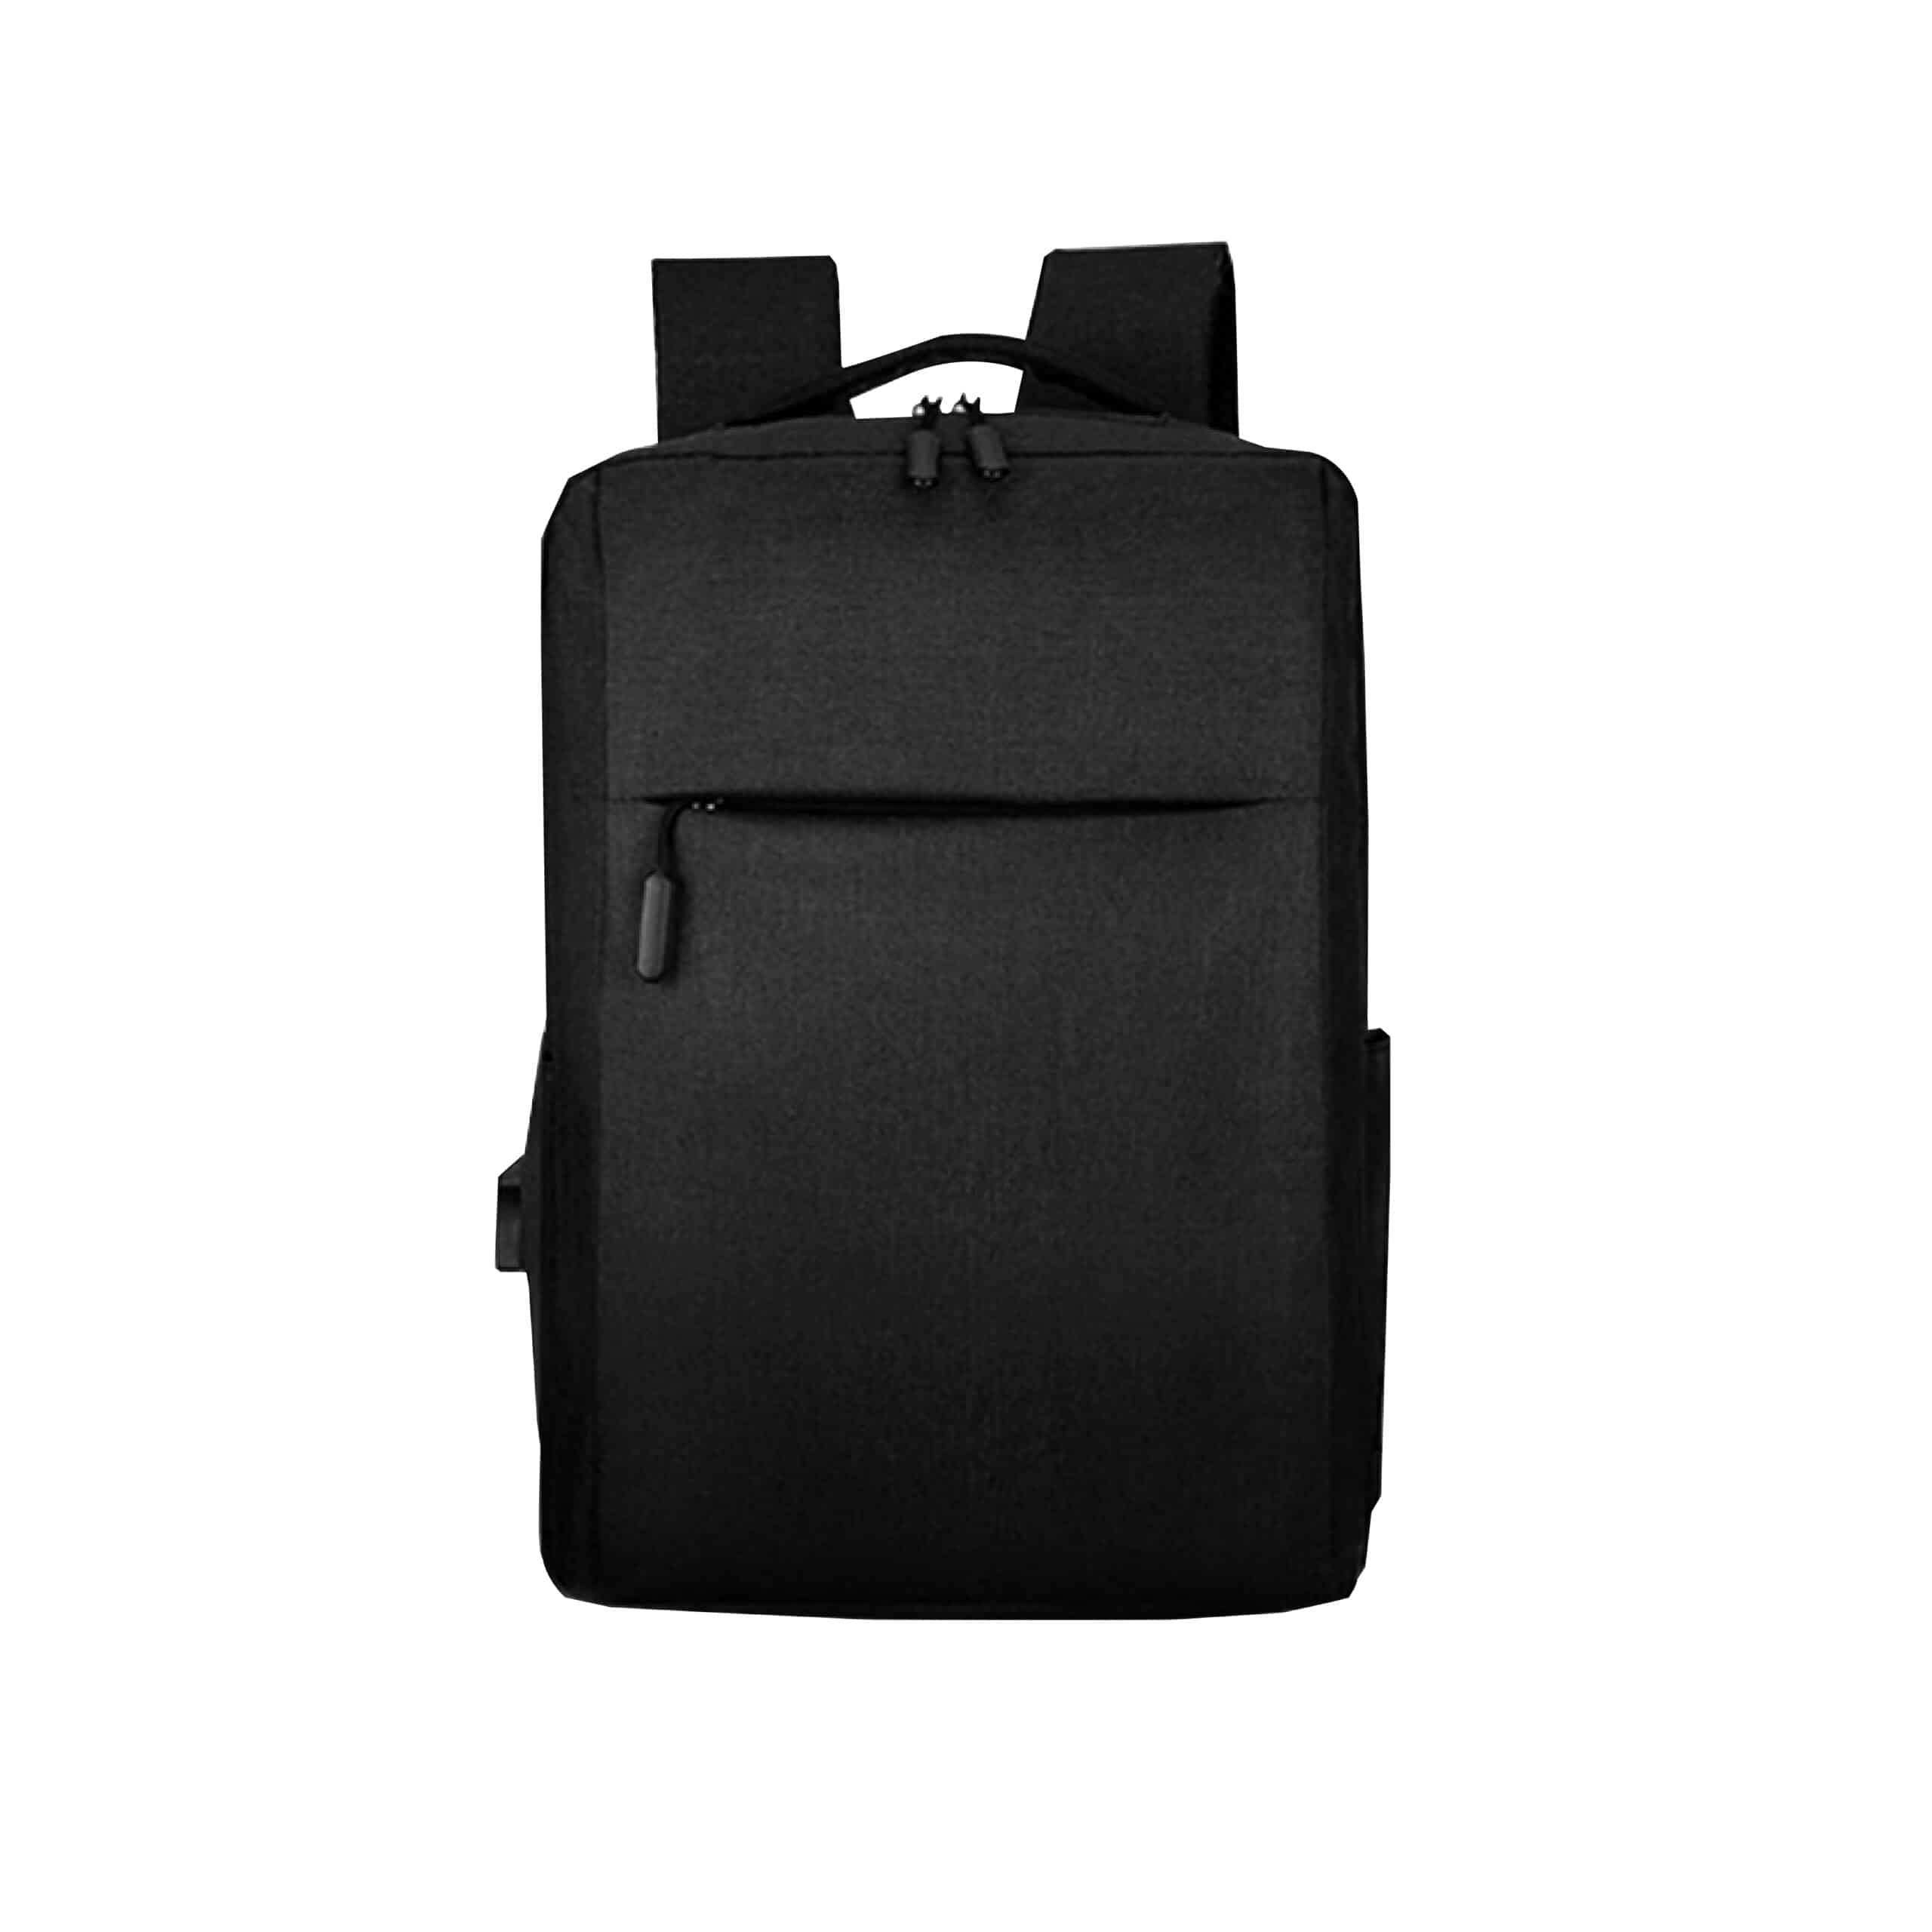 Laptop Backpack by SJ-World Gifts Malaysia Trusted Corporate Gift Supplier